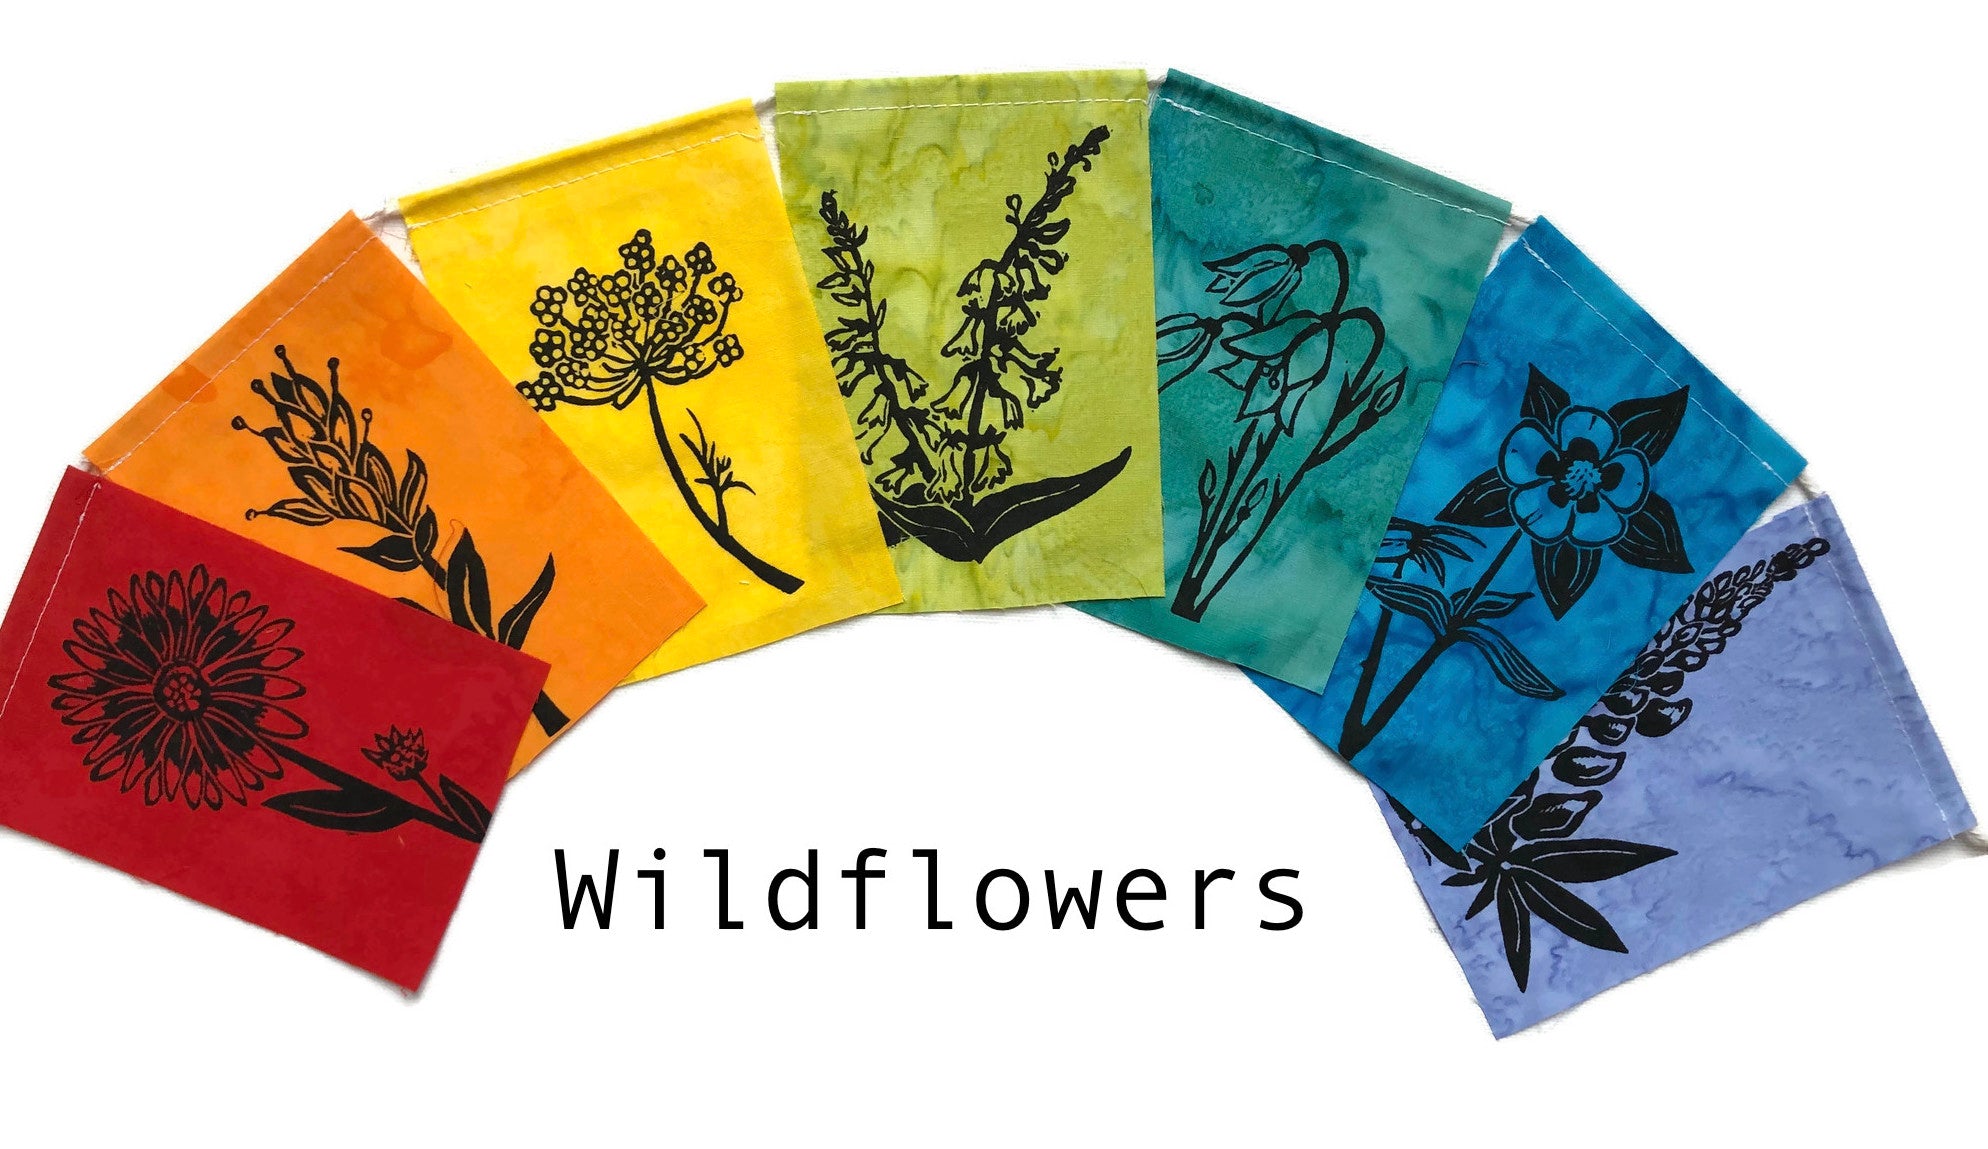 Small Flag Set with images of wildflowers handprinted on them